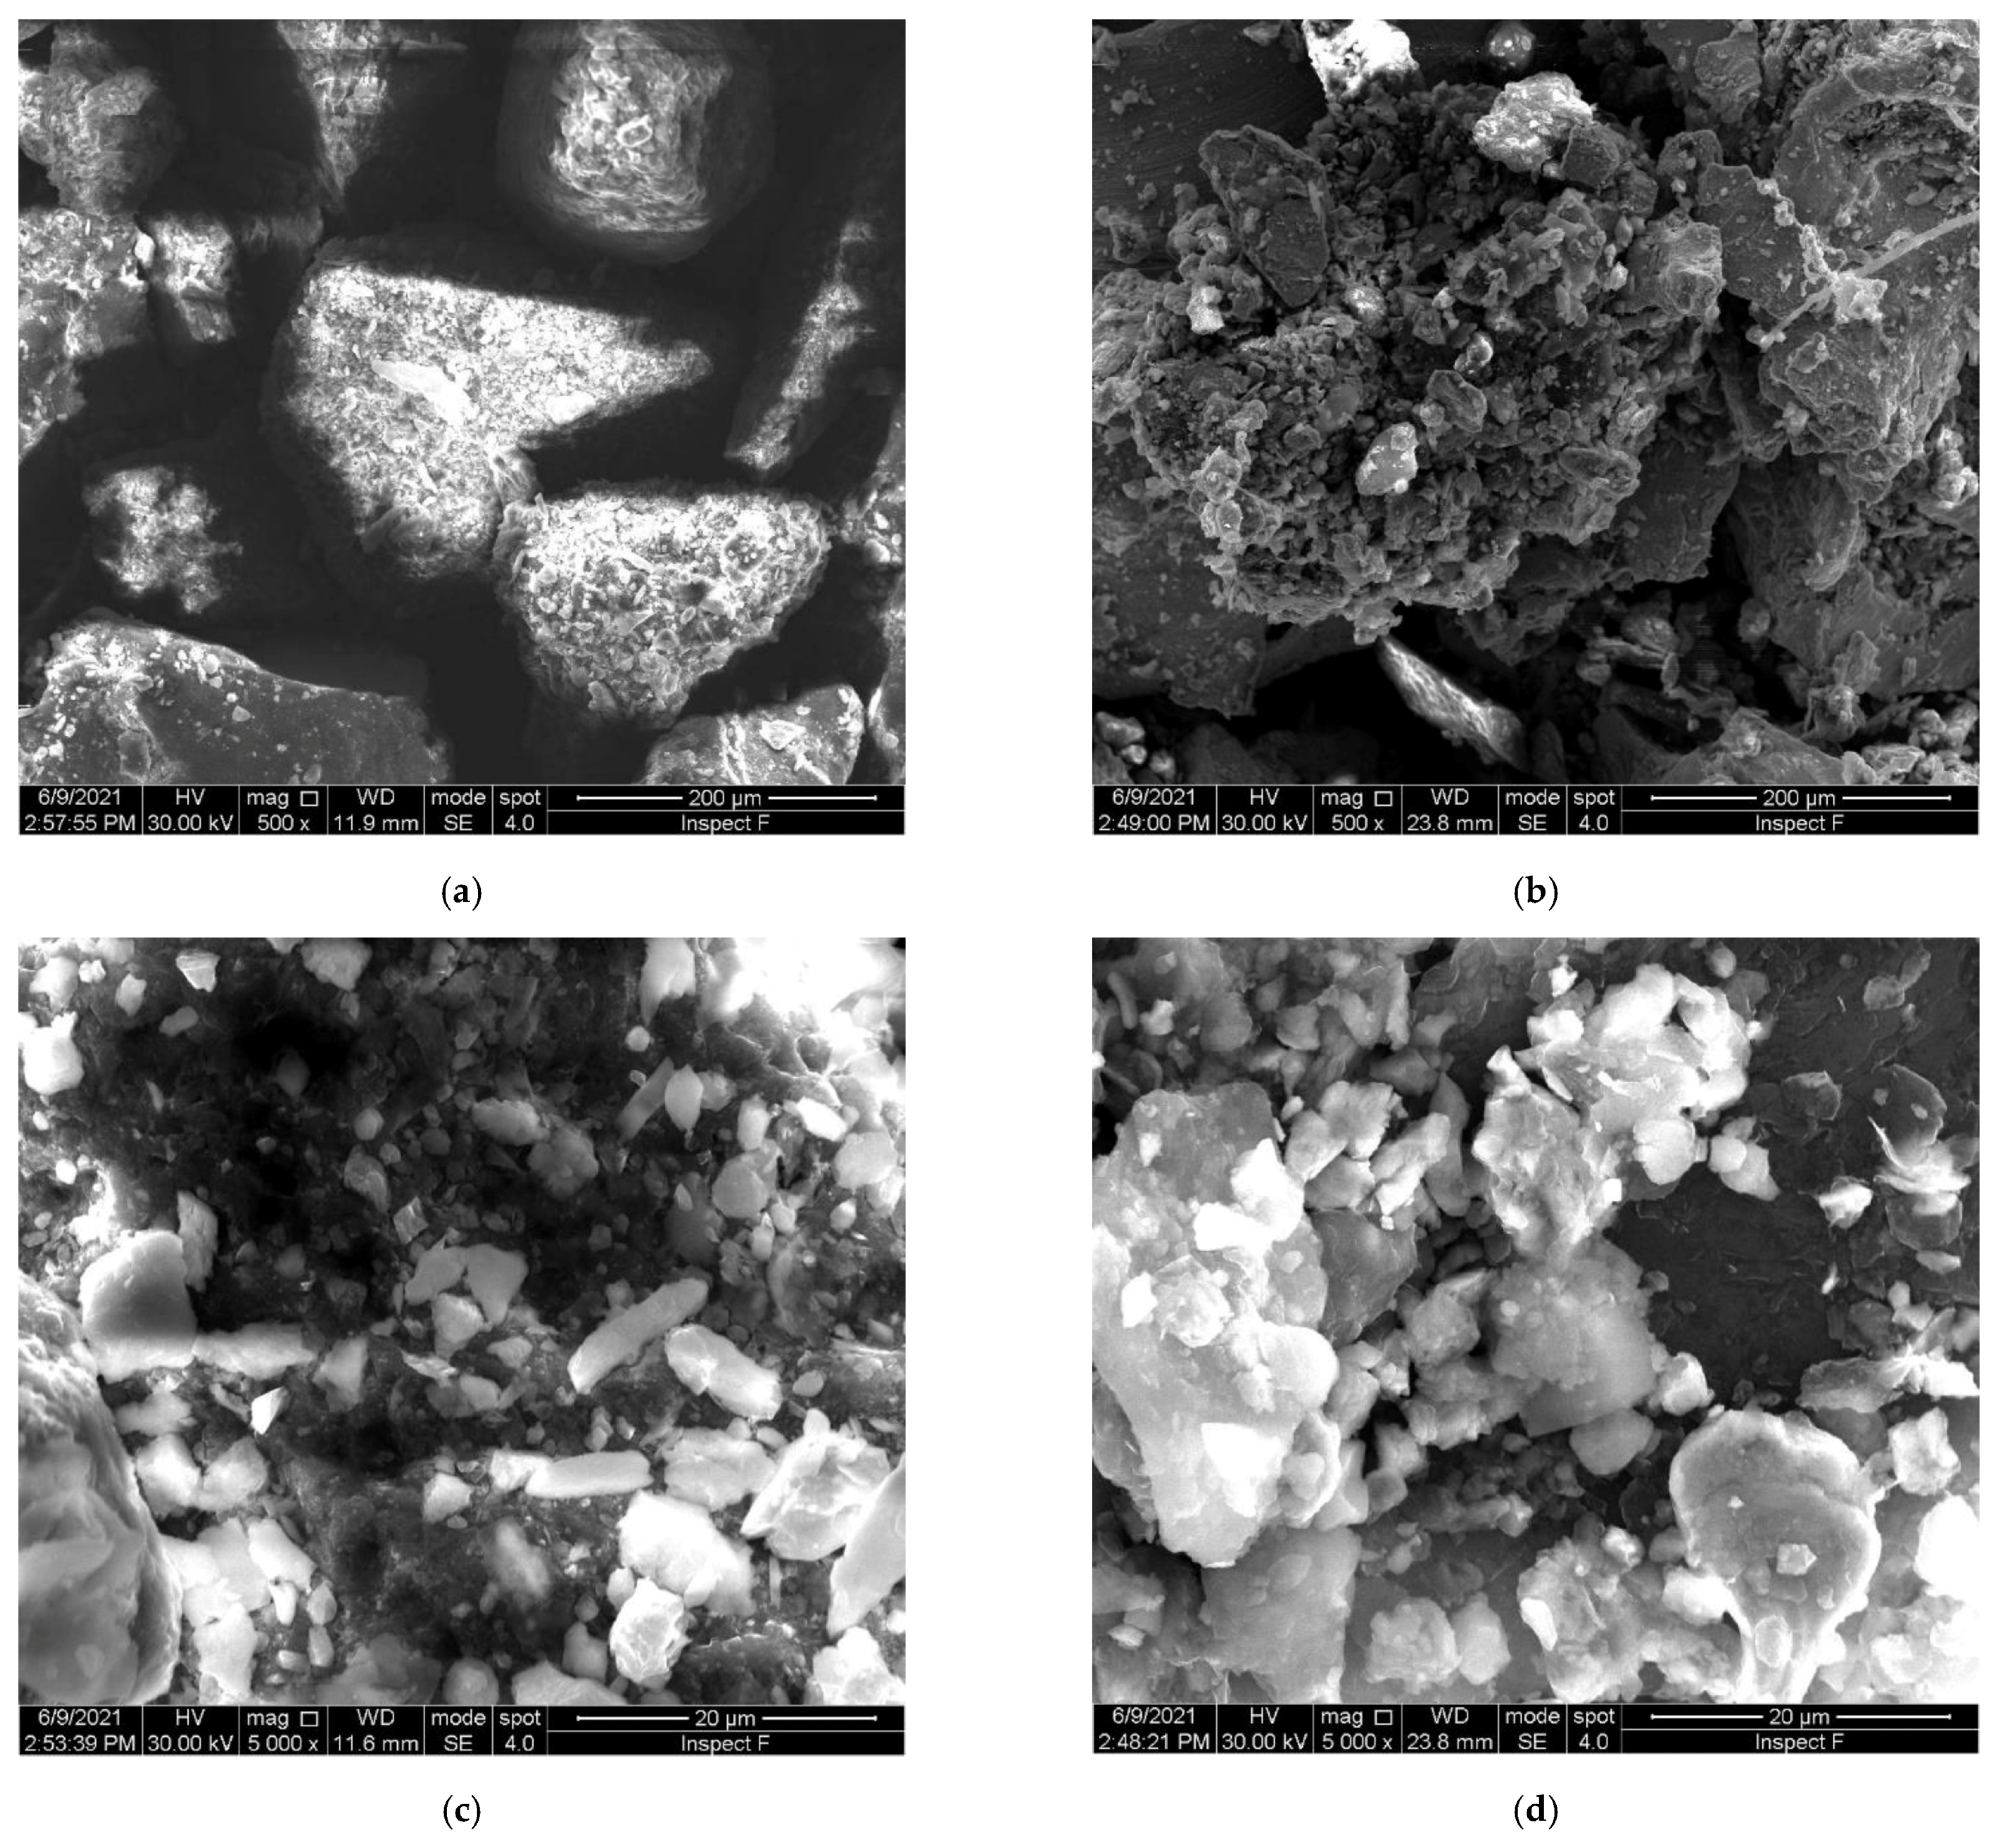 SEM images from SNSF and IFW.  (a) FNS, 0.5kx, (b) IFW, 0.5kx, (c) FNS, 5kx, (d) IFW, 5kx.